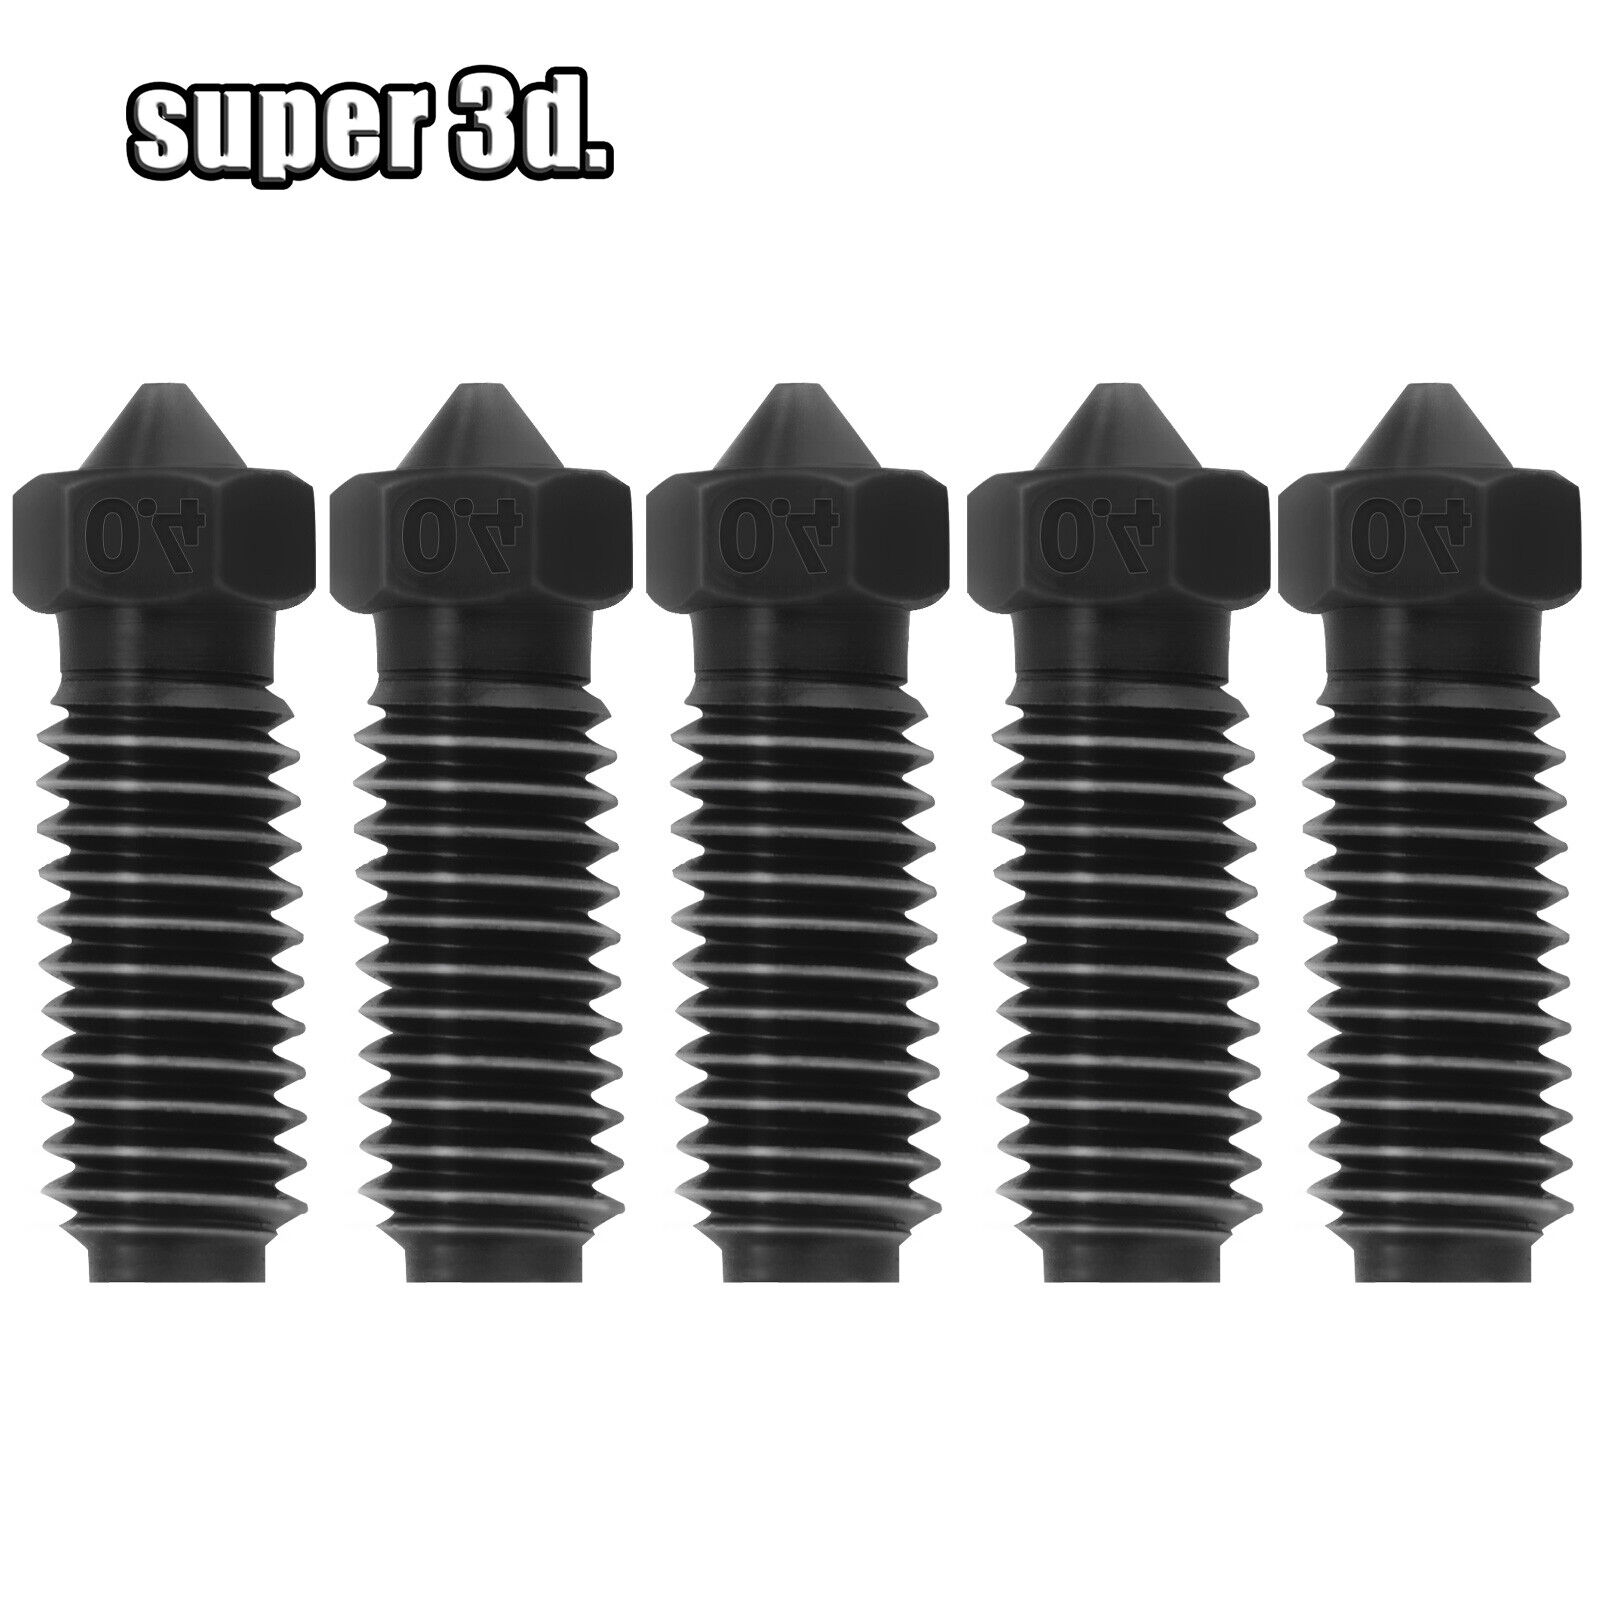 5Pcs 0.4/0.6/0.8mm Hardened Steel Nozzle for Anycubic Kobra 3 Printer